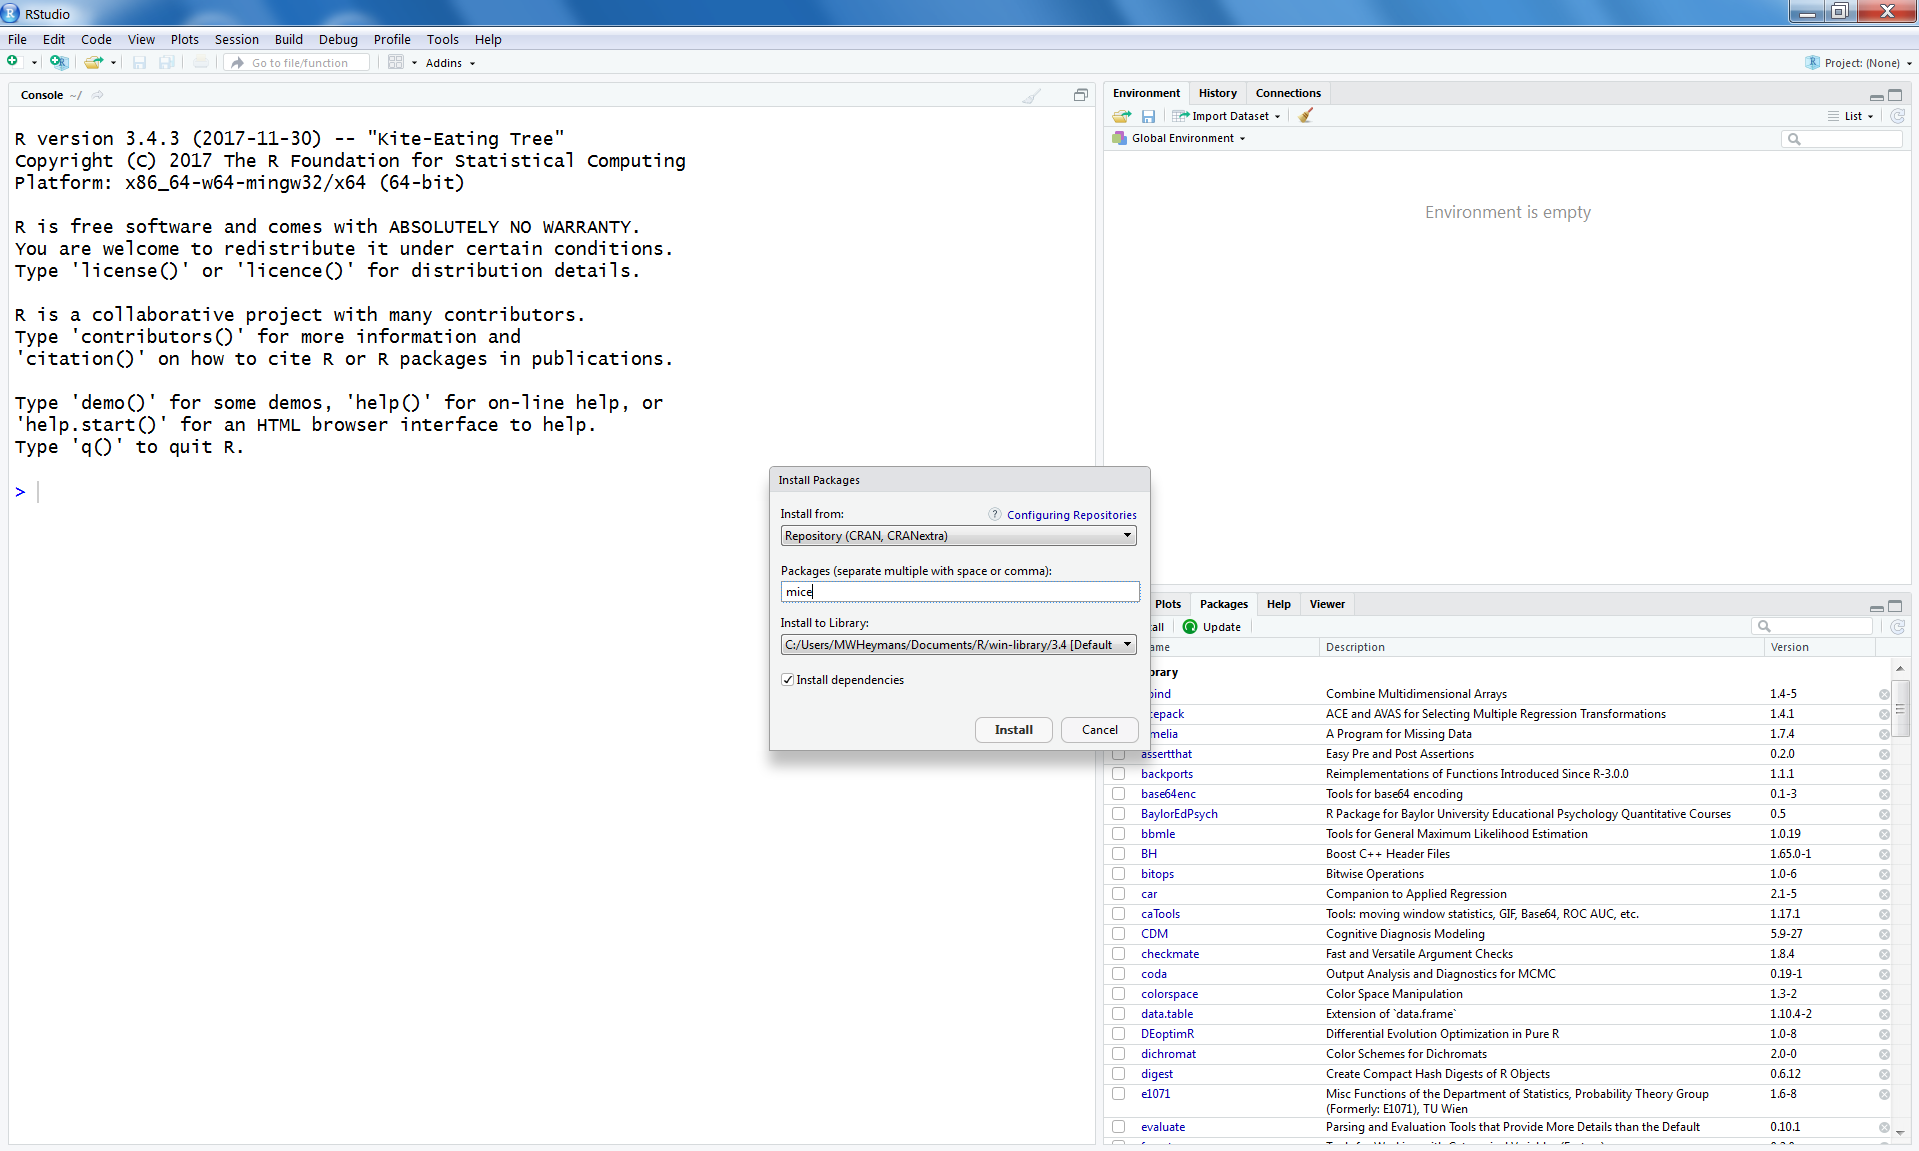 Install packages Window in RStudio to install packages from the CRAN website